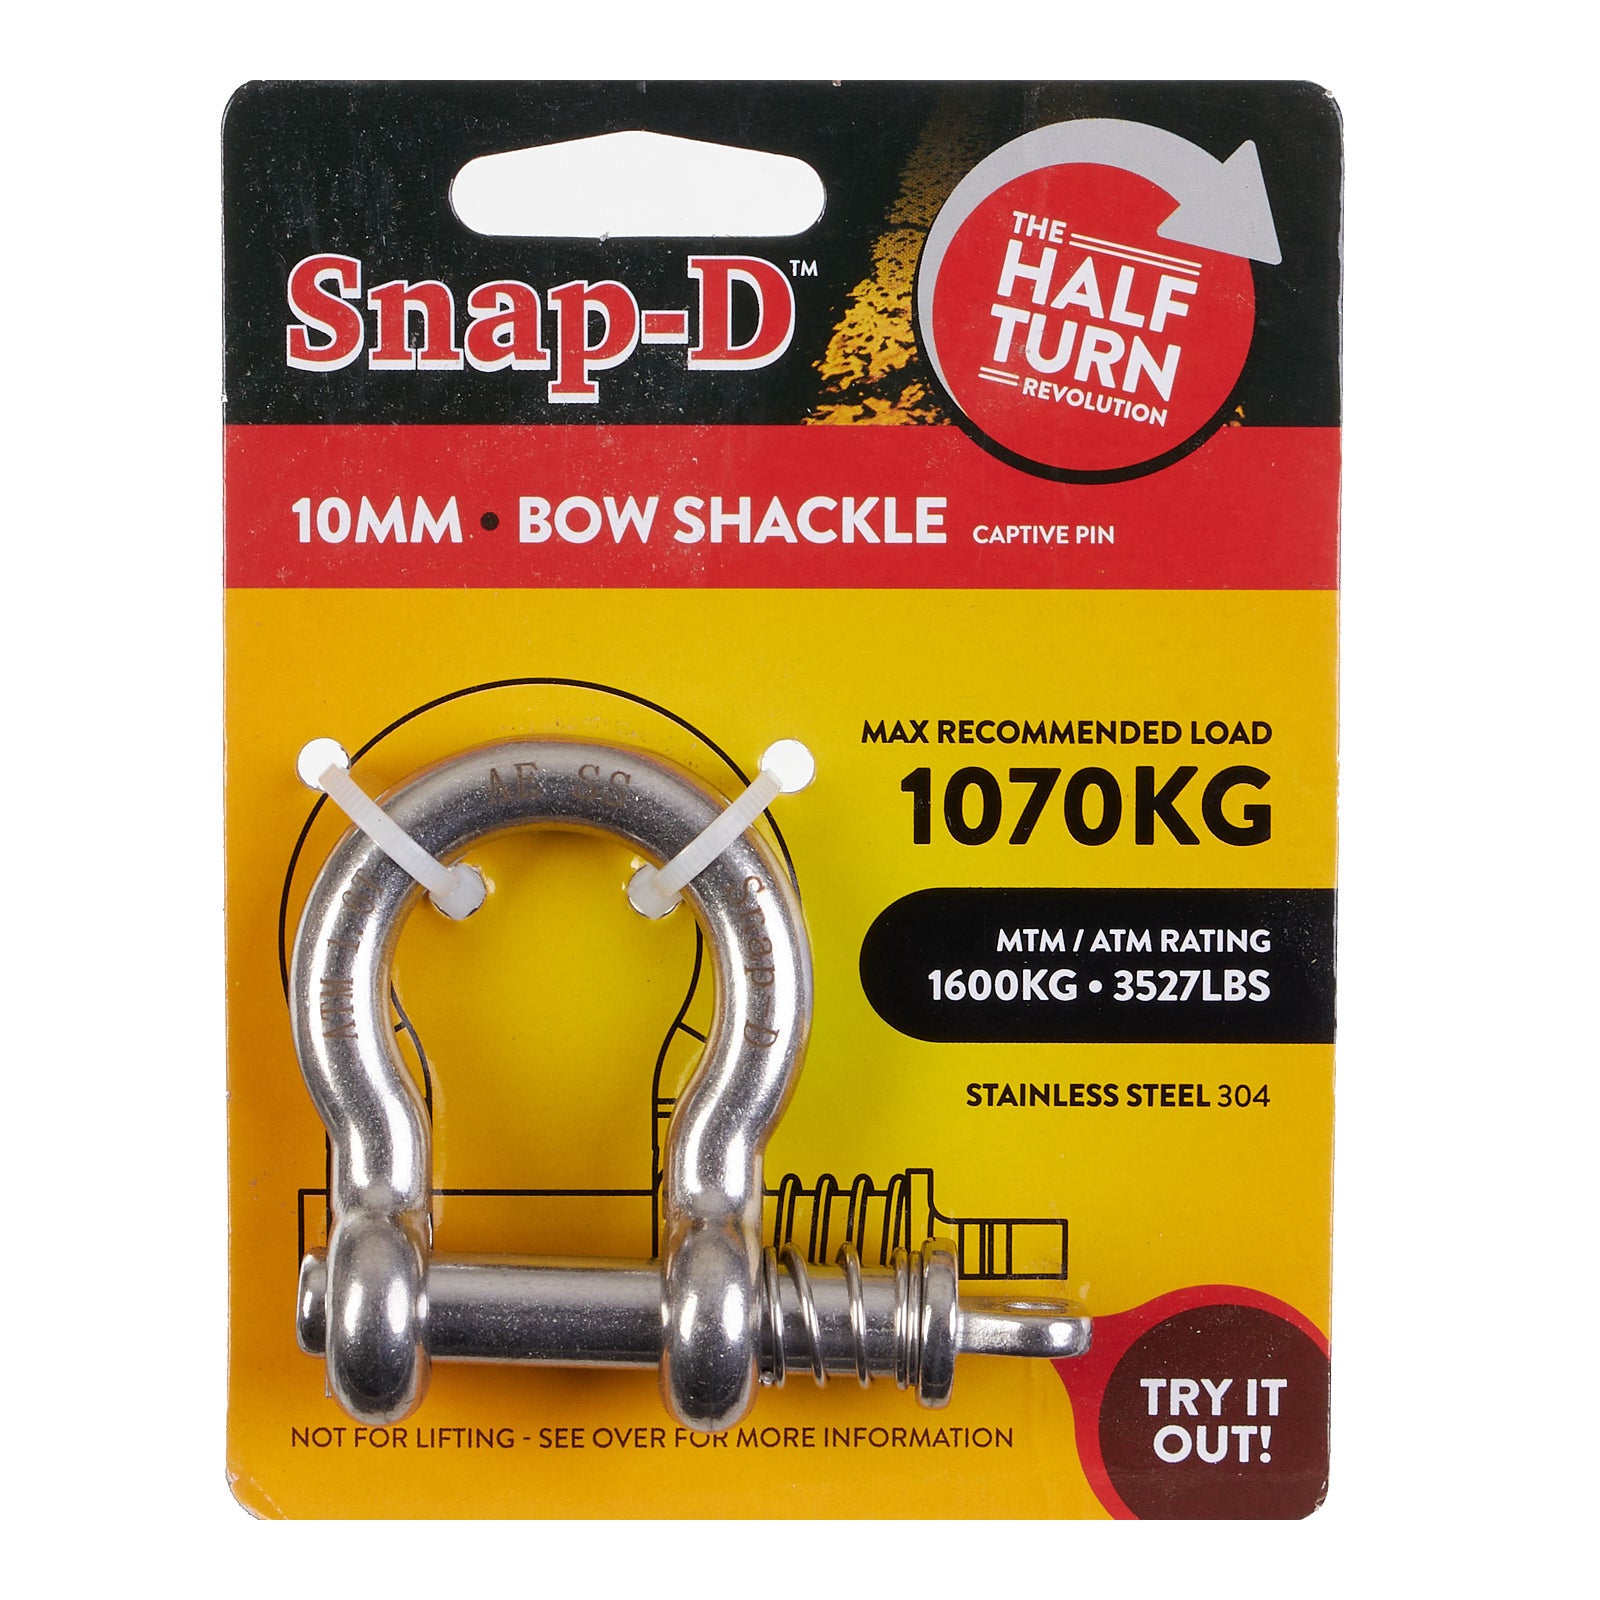 New SNAP-D Stainless Steel Bow Shackle - 10mm #SD10BSS